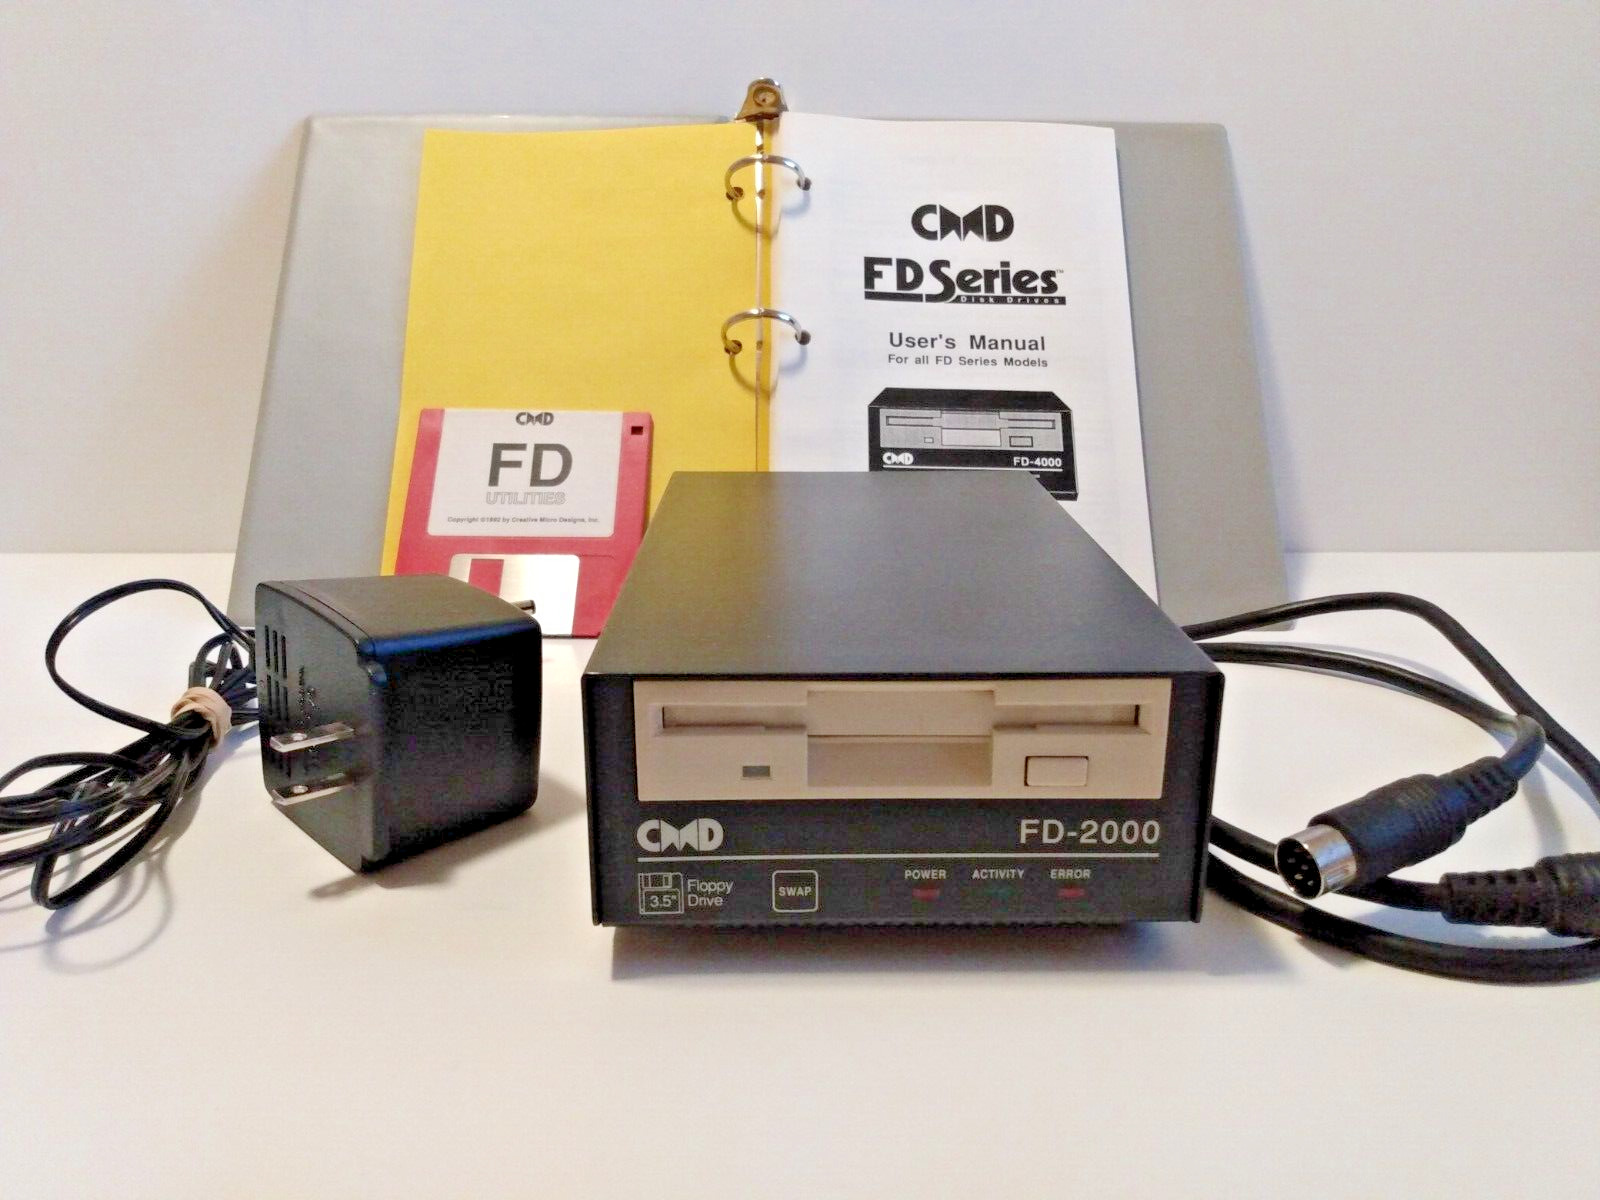 CMD FD-2000 3.5 DISK DRIVE FOR COMMODORE 64/128 TESTED w/Manual & Utilities Disk